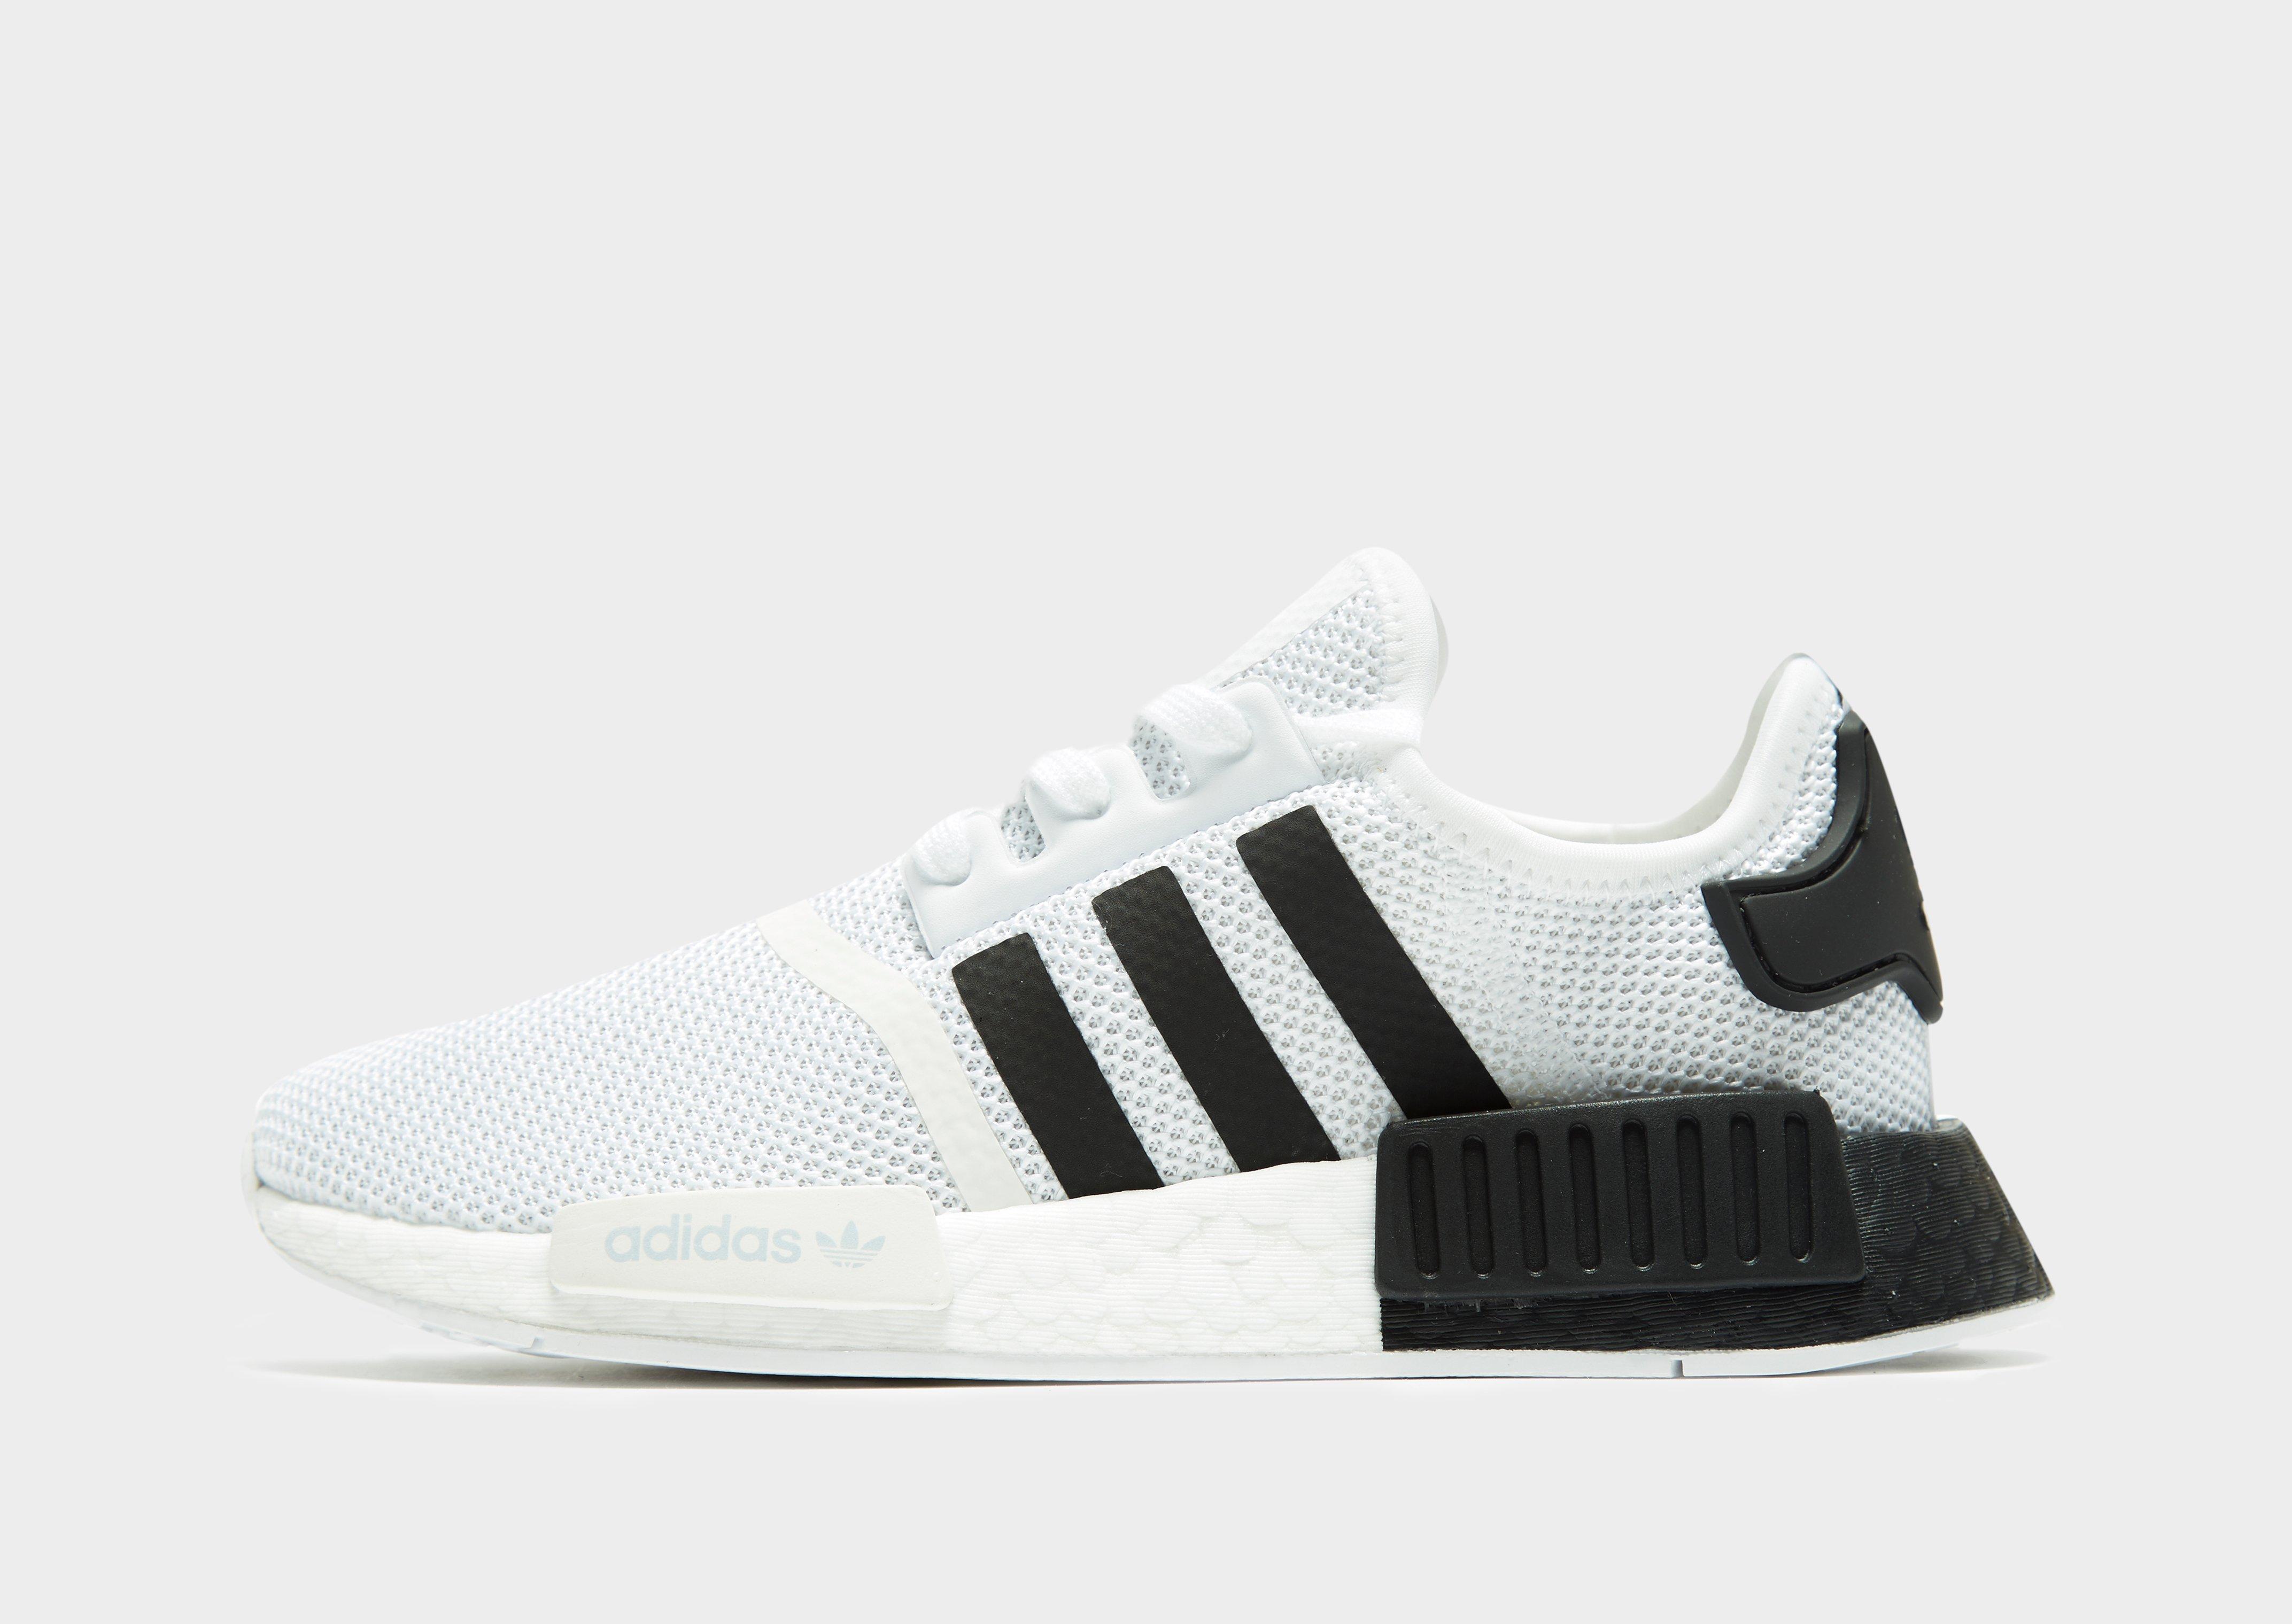 99% off Adidas Other Adidas NMD R1 RARE ; Champs sports